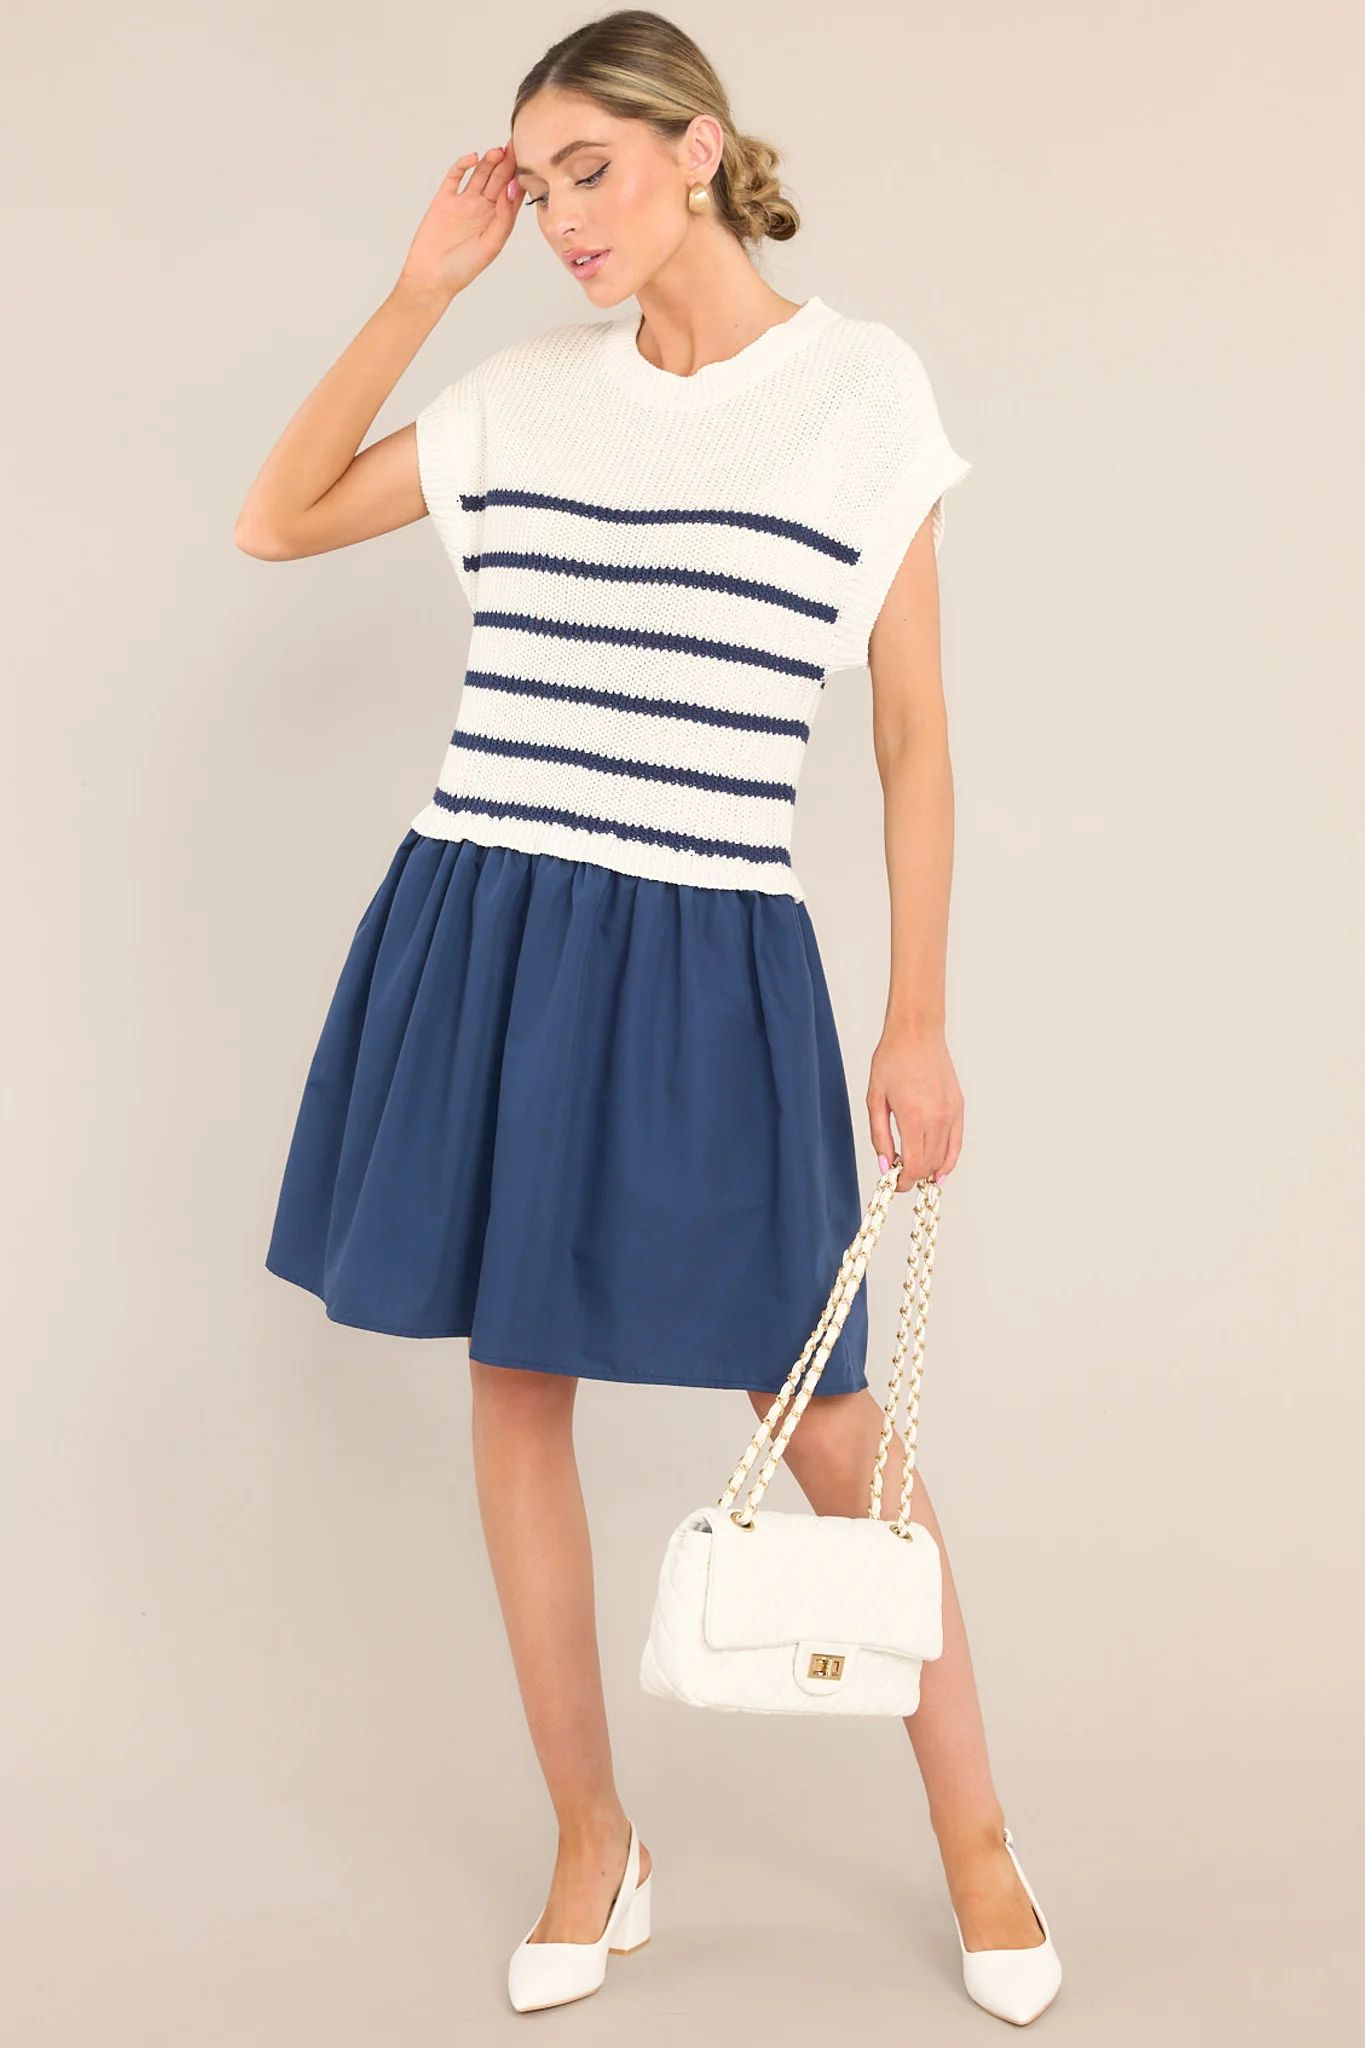 Journey Continues Ivory & Navy Stripe Sweater Mini Dress | Red Dress